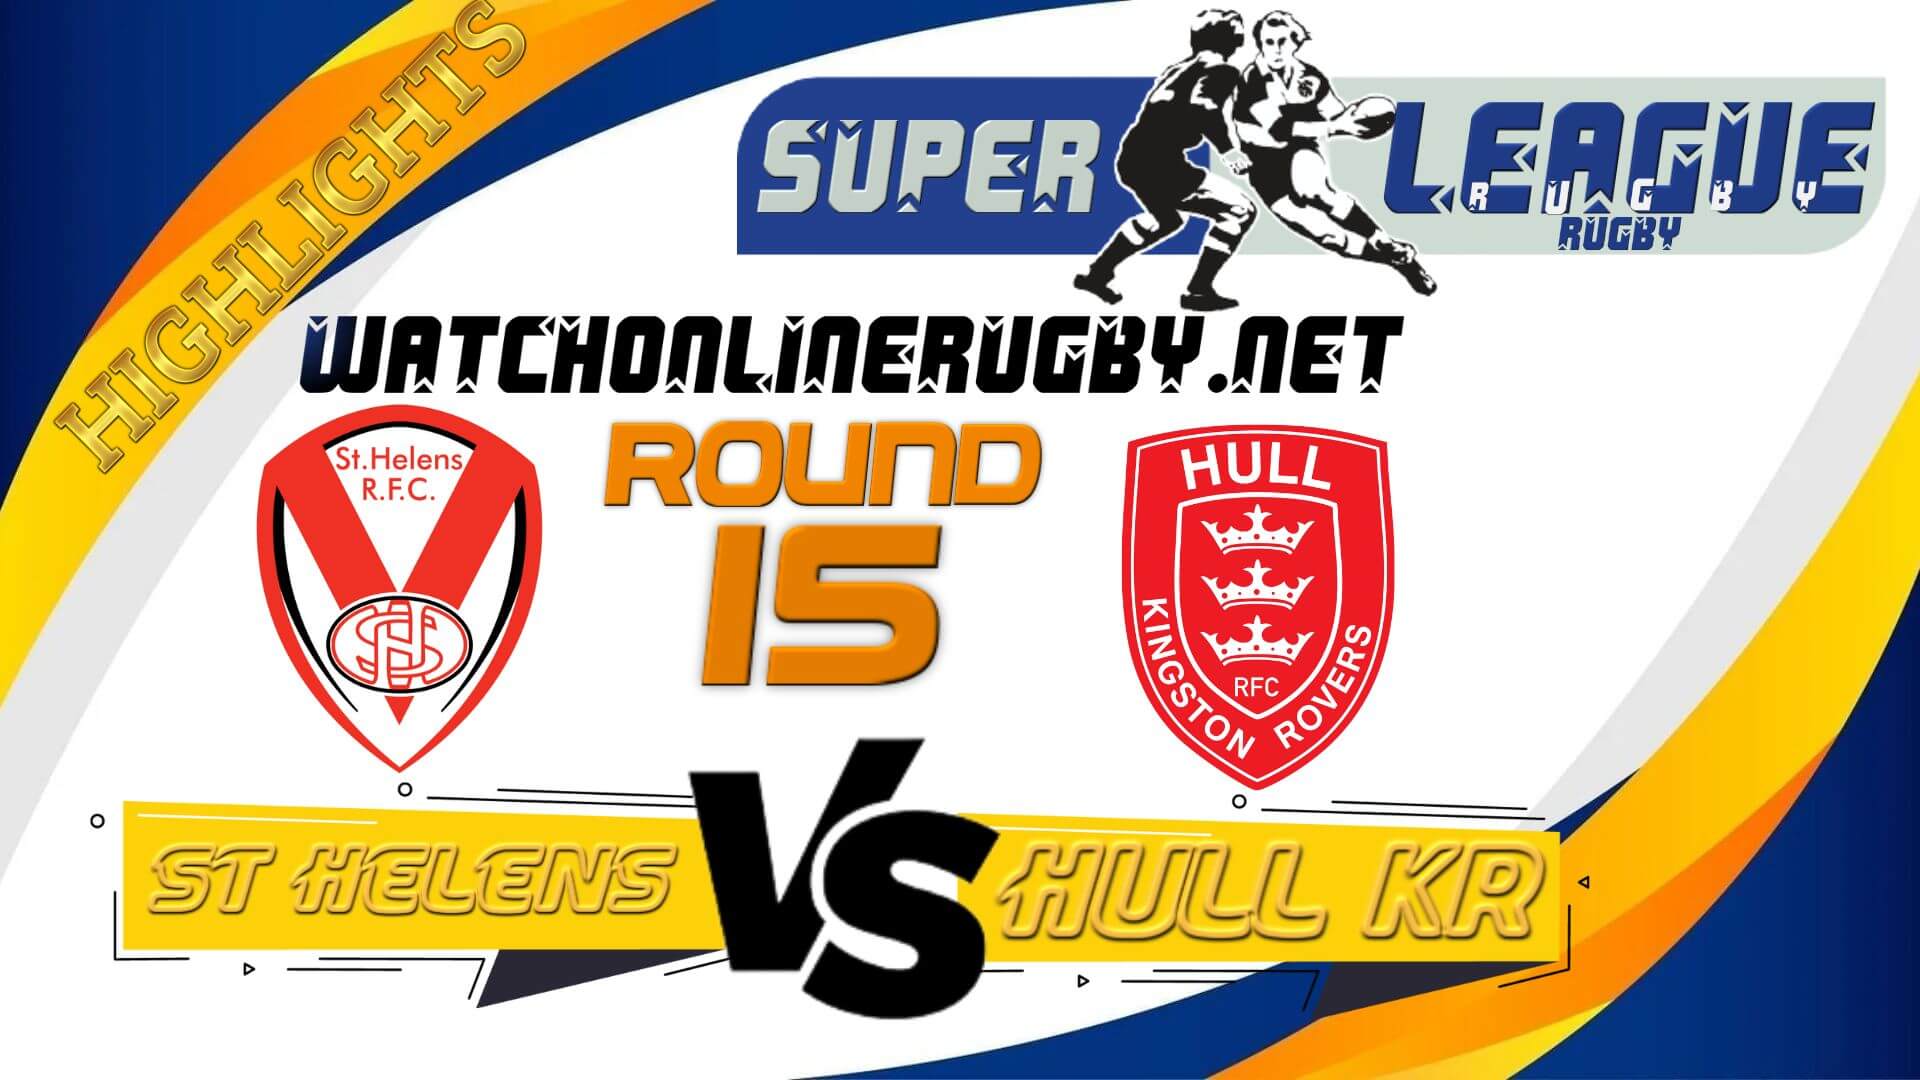 St Helens Vs Hull KR Super League Rugby 2022 RD 15